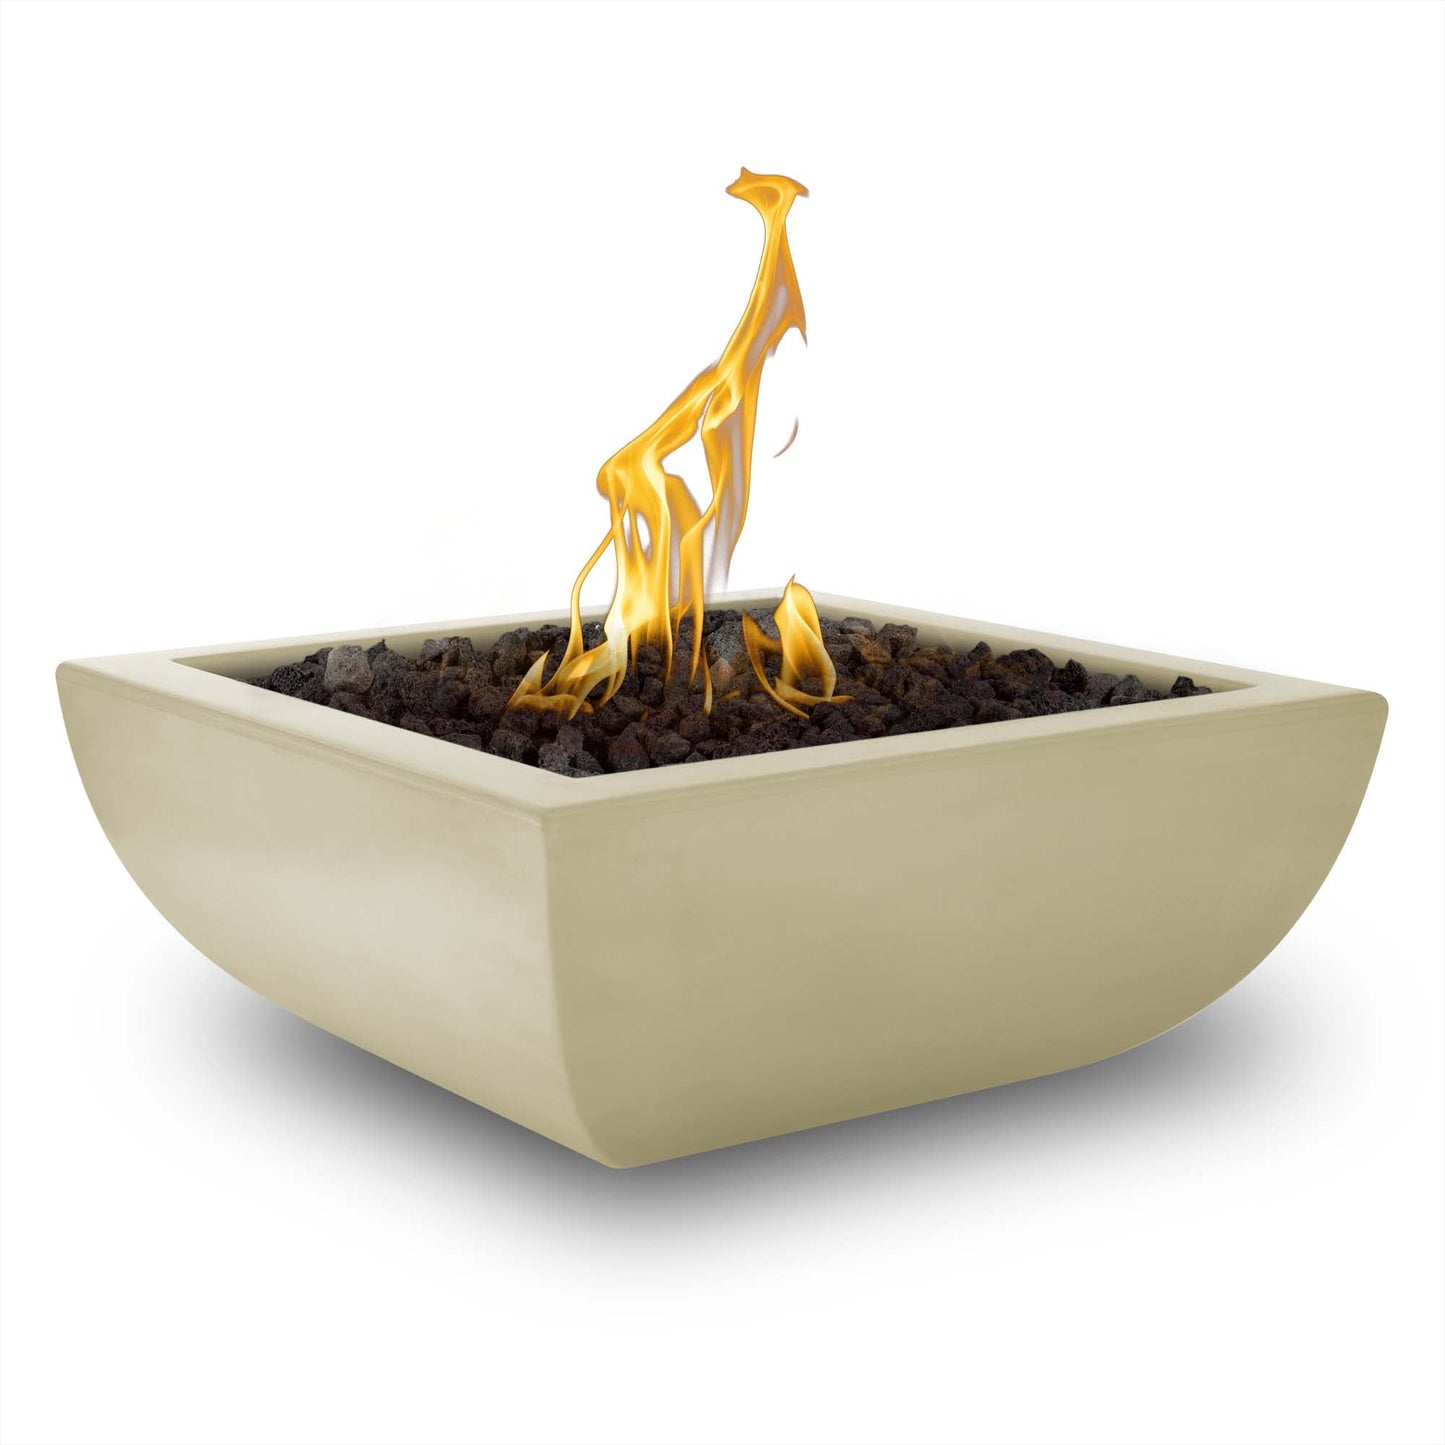 The Outdoor Plus Square Avalon 24" Metallic Pearl GFRC Concrete Liquid Propane Fire Bowl with Match Lit with Flame Sense Ignition